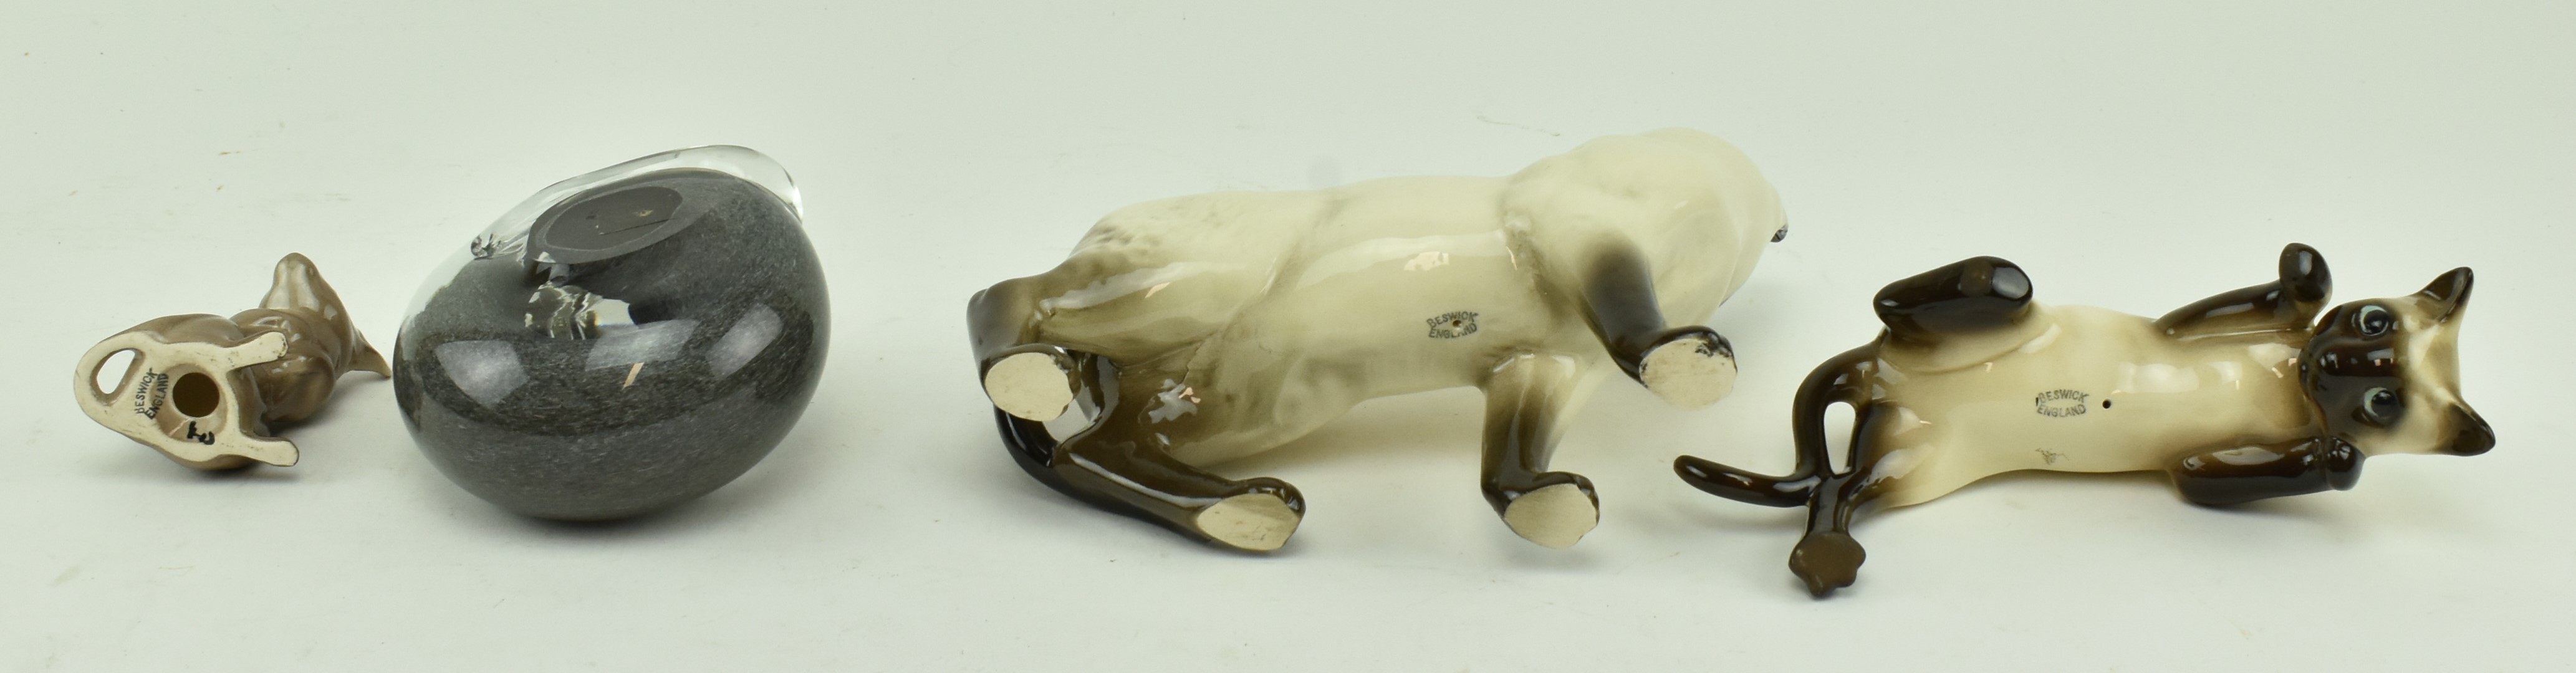 TWO BESWICK SIAMESE CATS, A MOUSE & LANGHAM GLASS CAT - Image 8 of 10